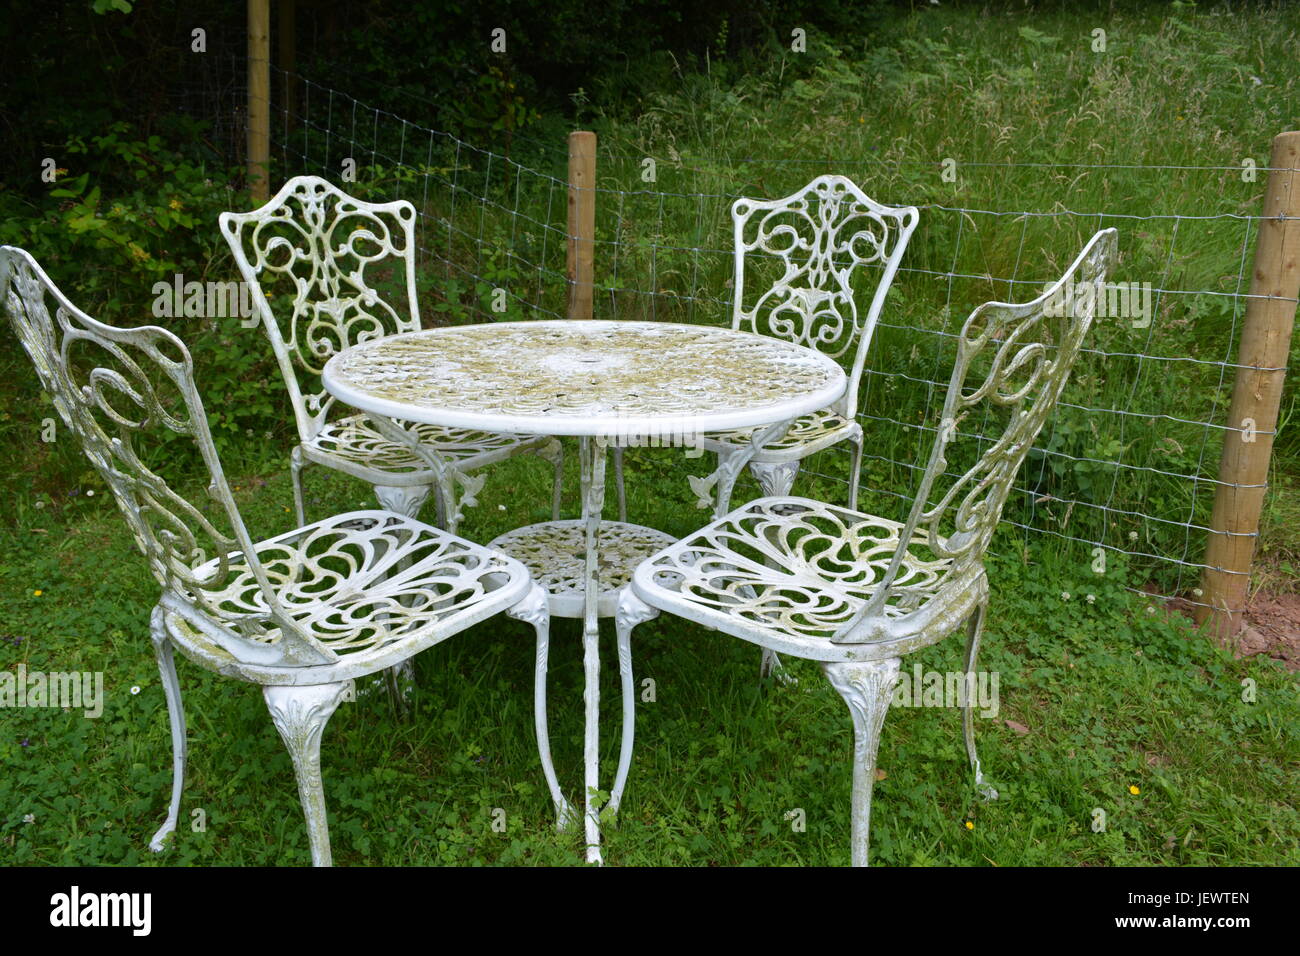 weathered ornate scrolled aluminium white painted round garden table and chair set on lawn with wire mesh boundary fence meadow grass in background Stock Photo